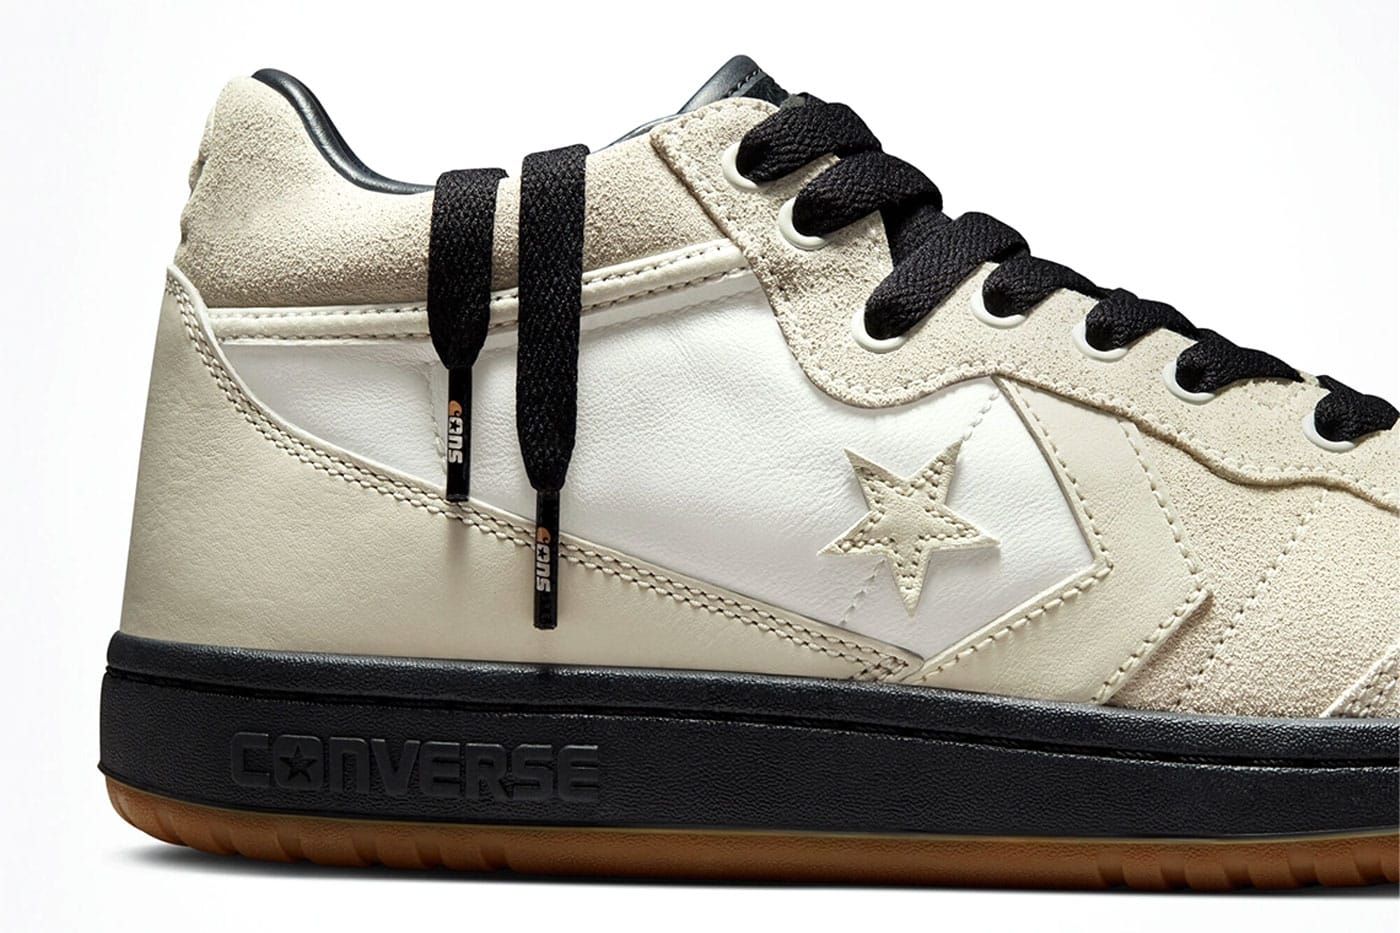 Converse CONS x Carhartt WIP Release One Star Pro and Fastbreak 